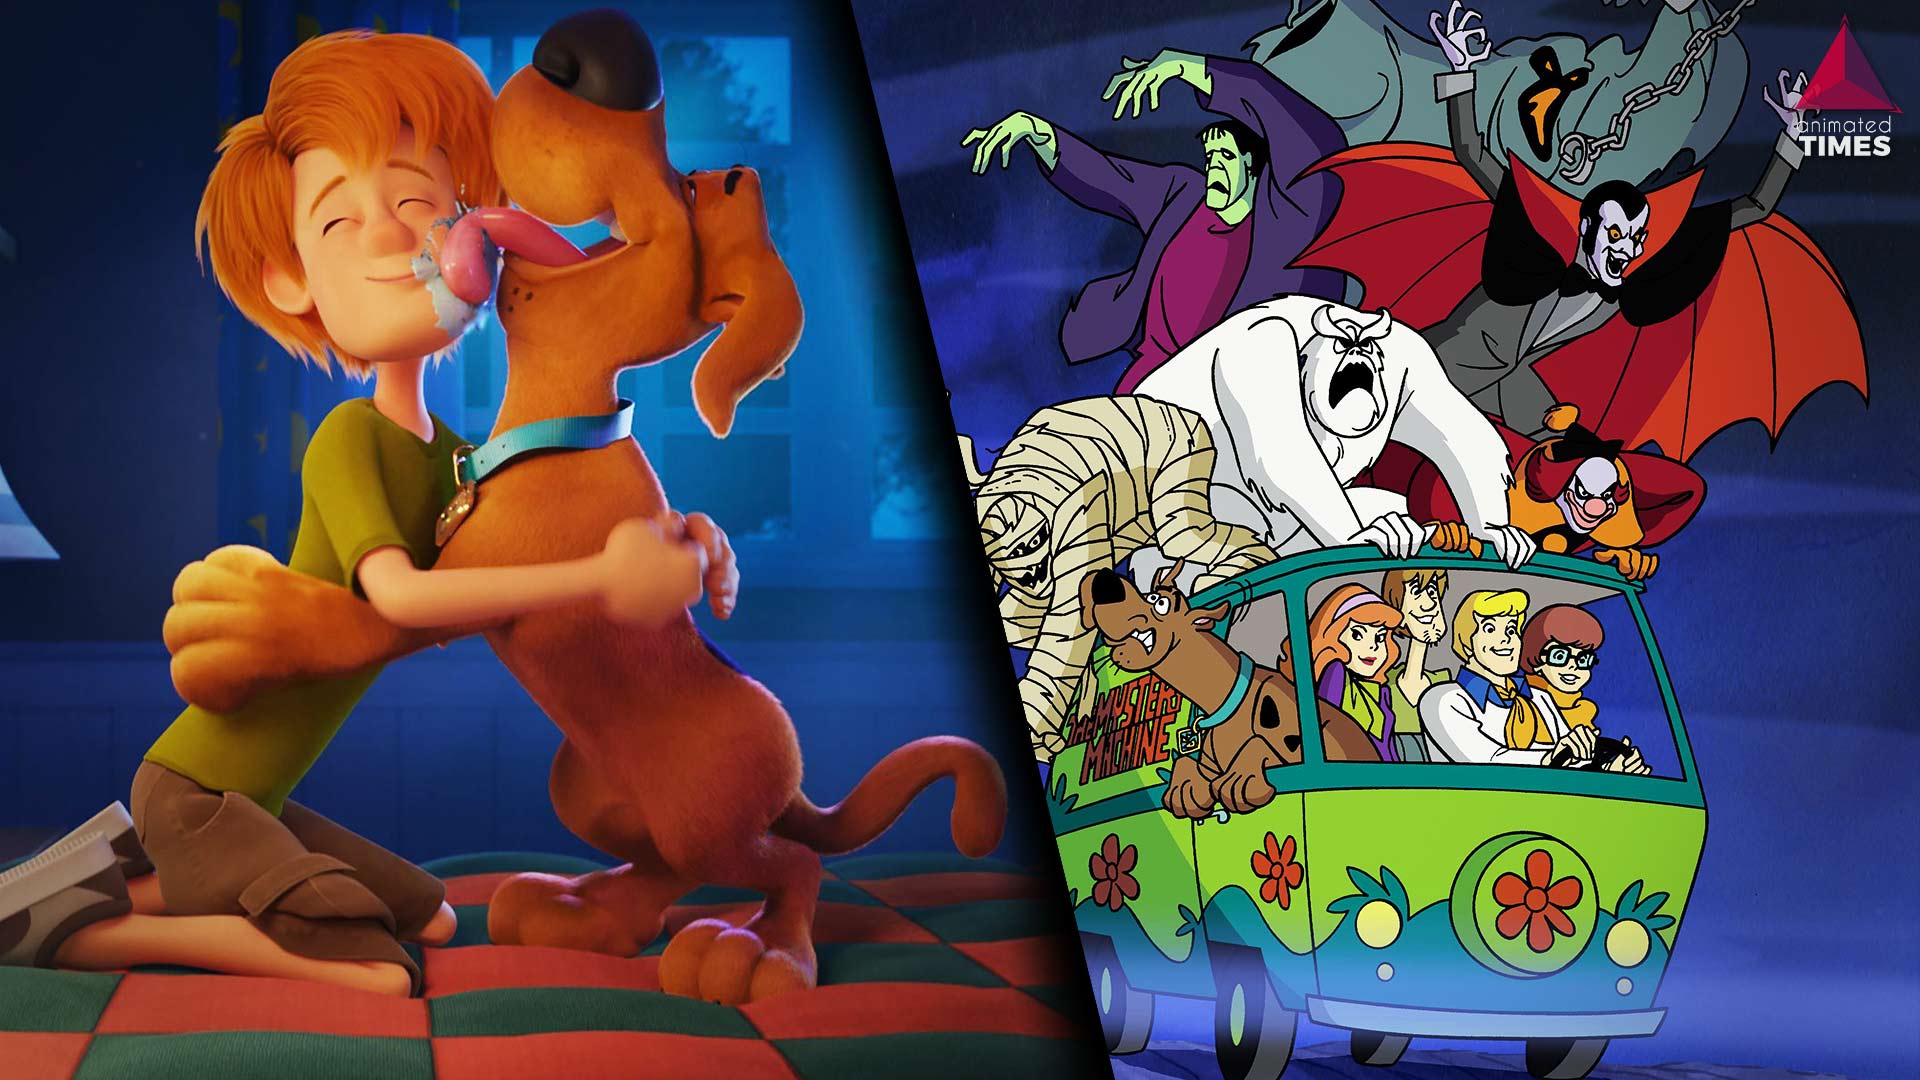 4 Extremely Dark and Chilling Theories About Scooby-Doo